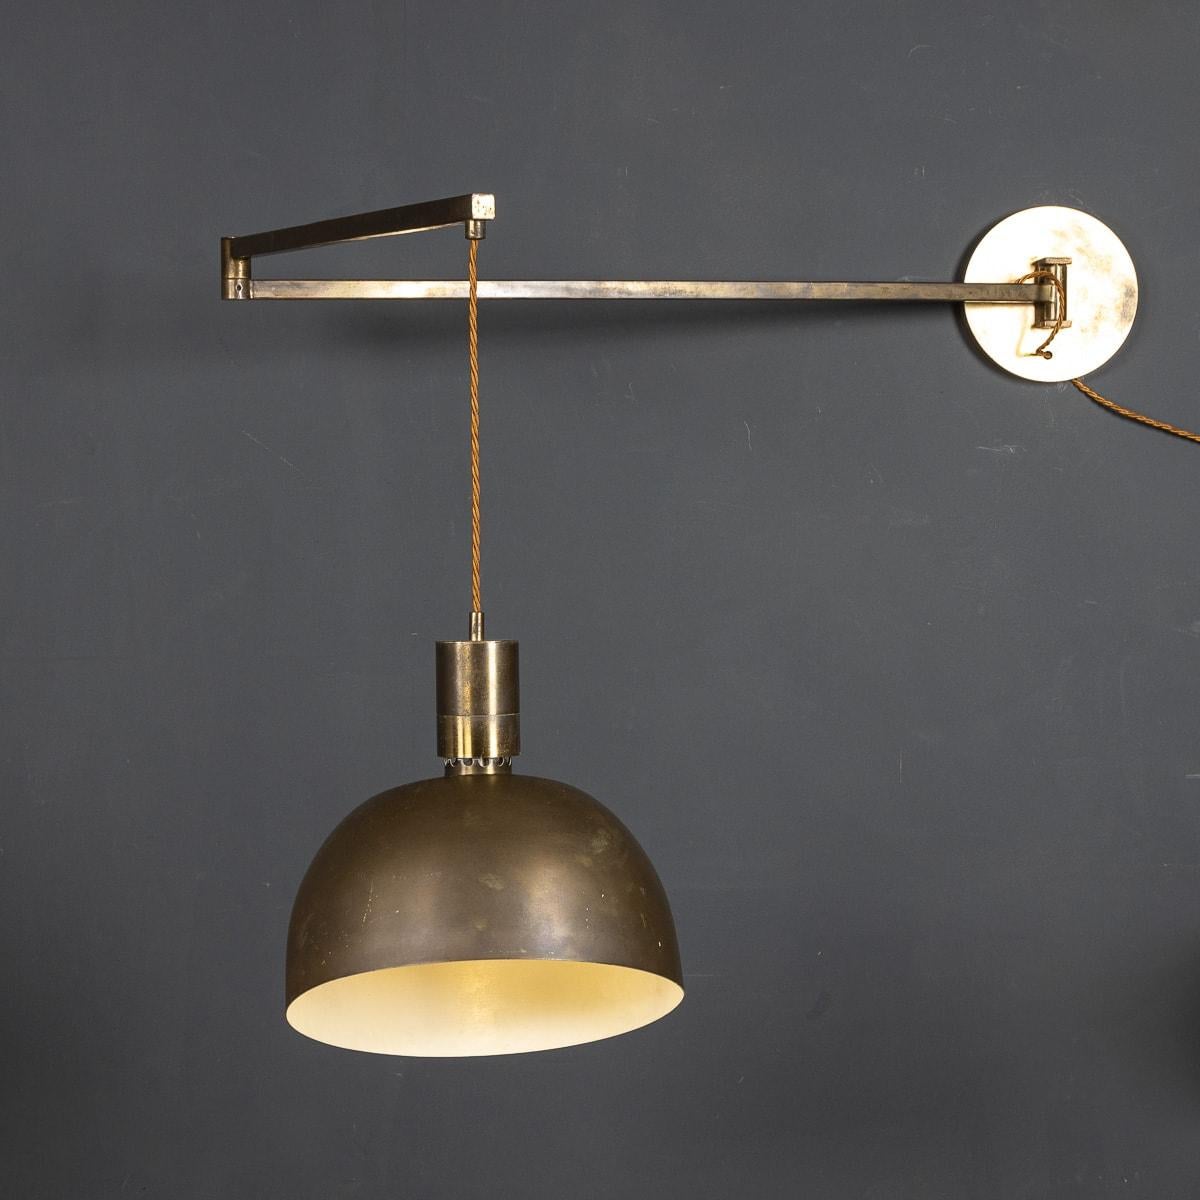 20th Century Pair of Italian Brass Articulated Wall Lights by Albini & Helg, c.1960 For Sale